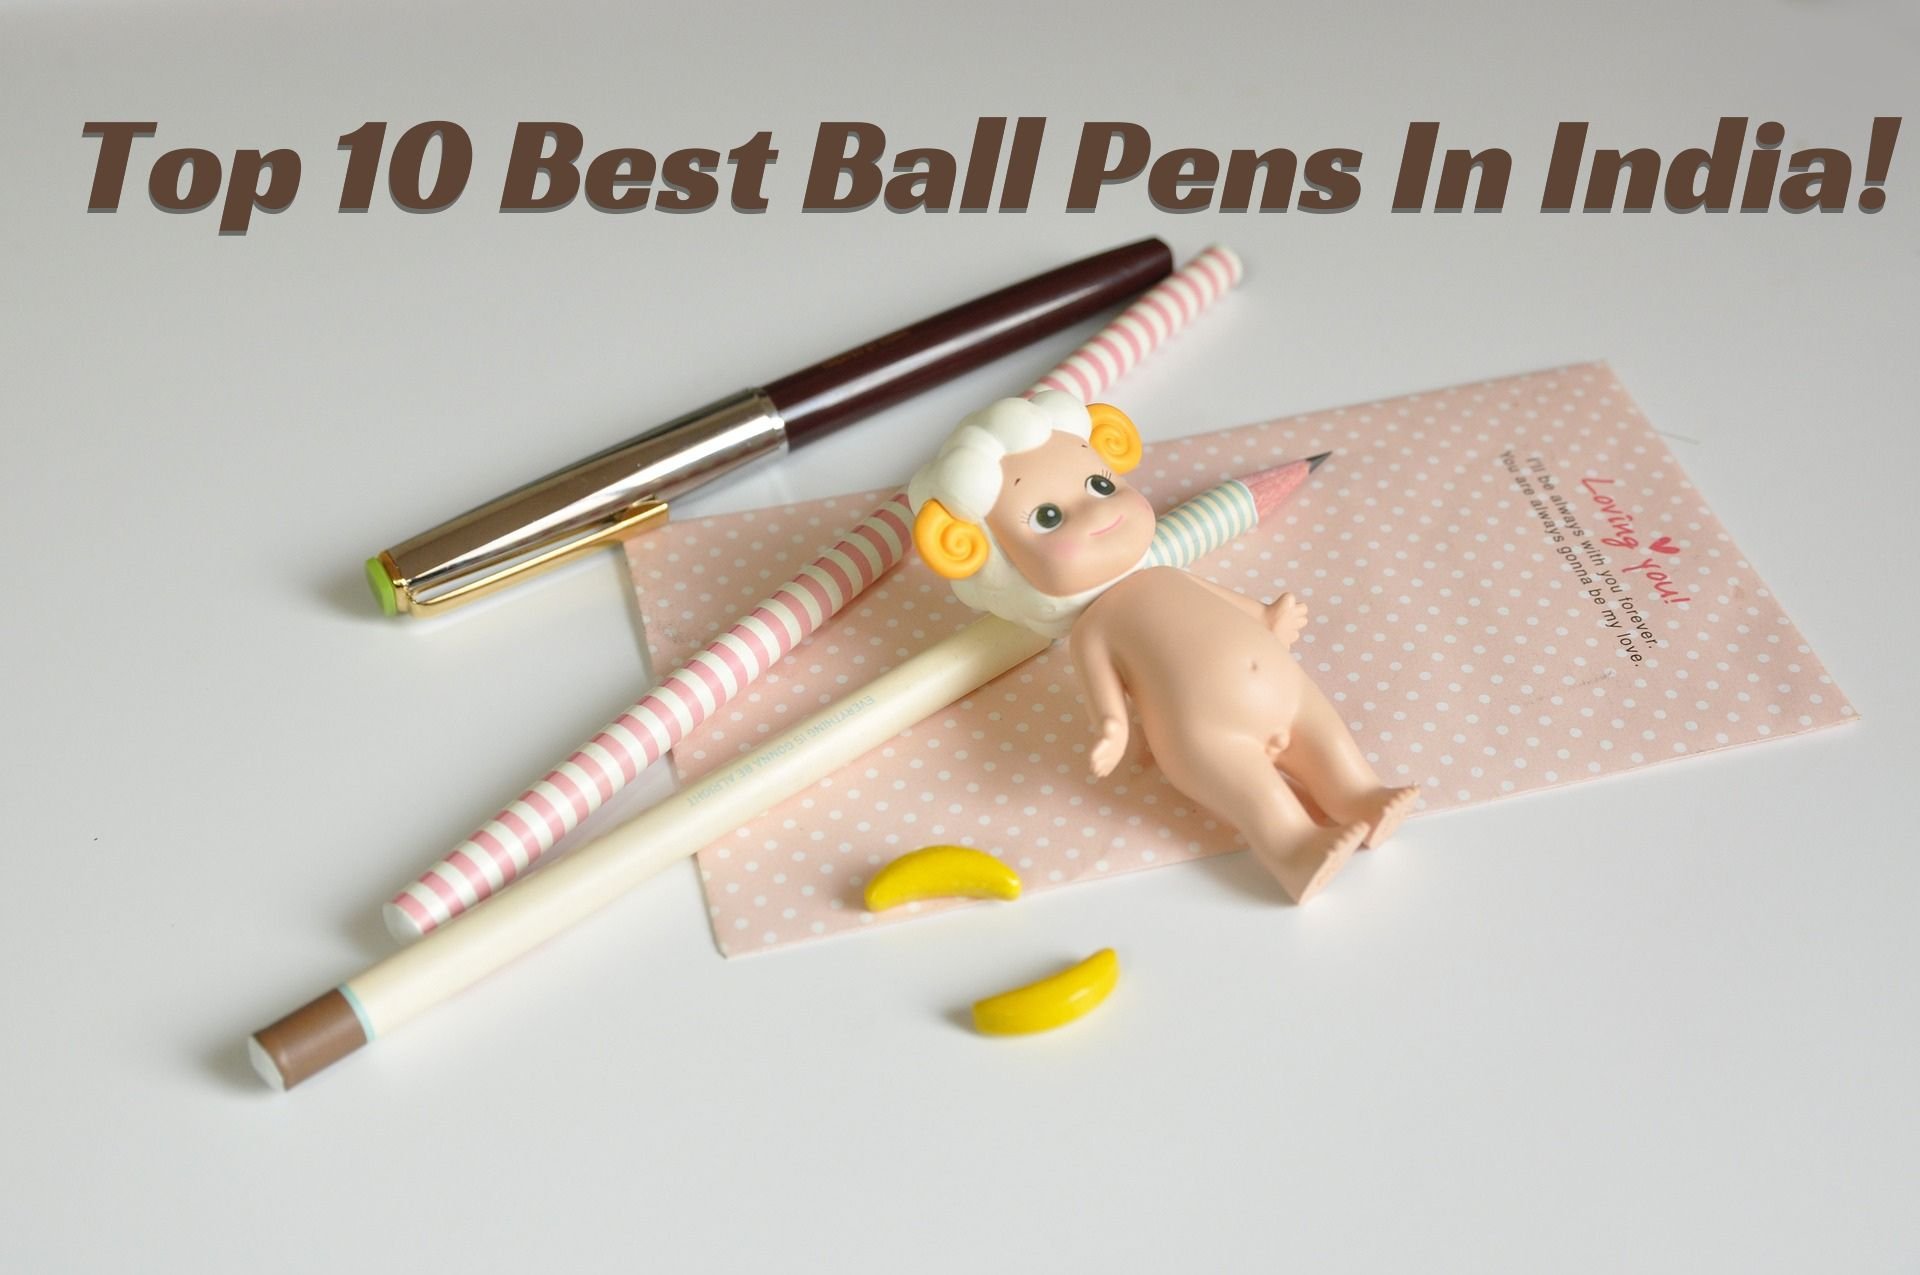 Top 10 Best Ball Pens In India